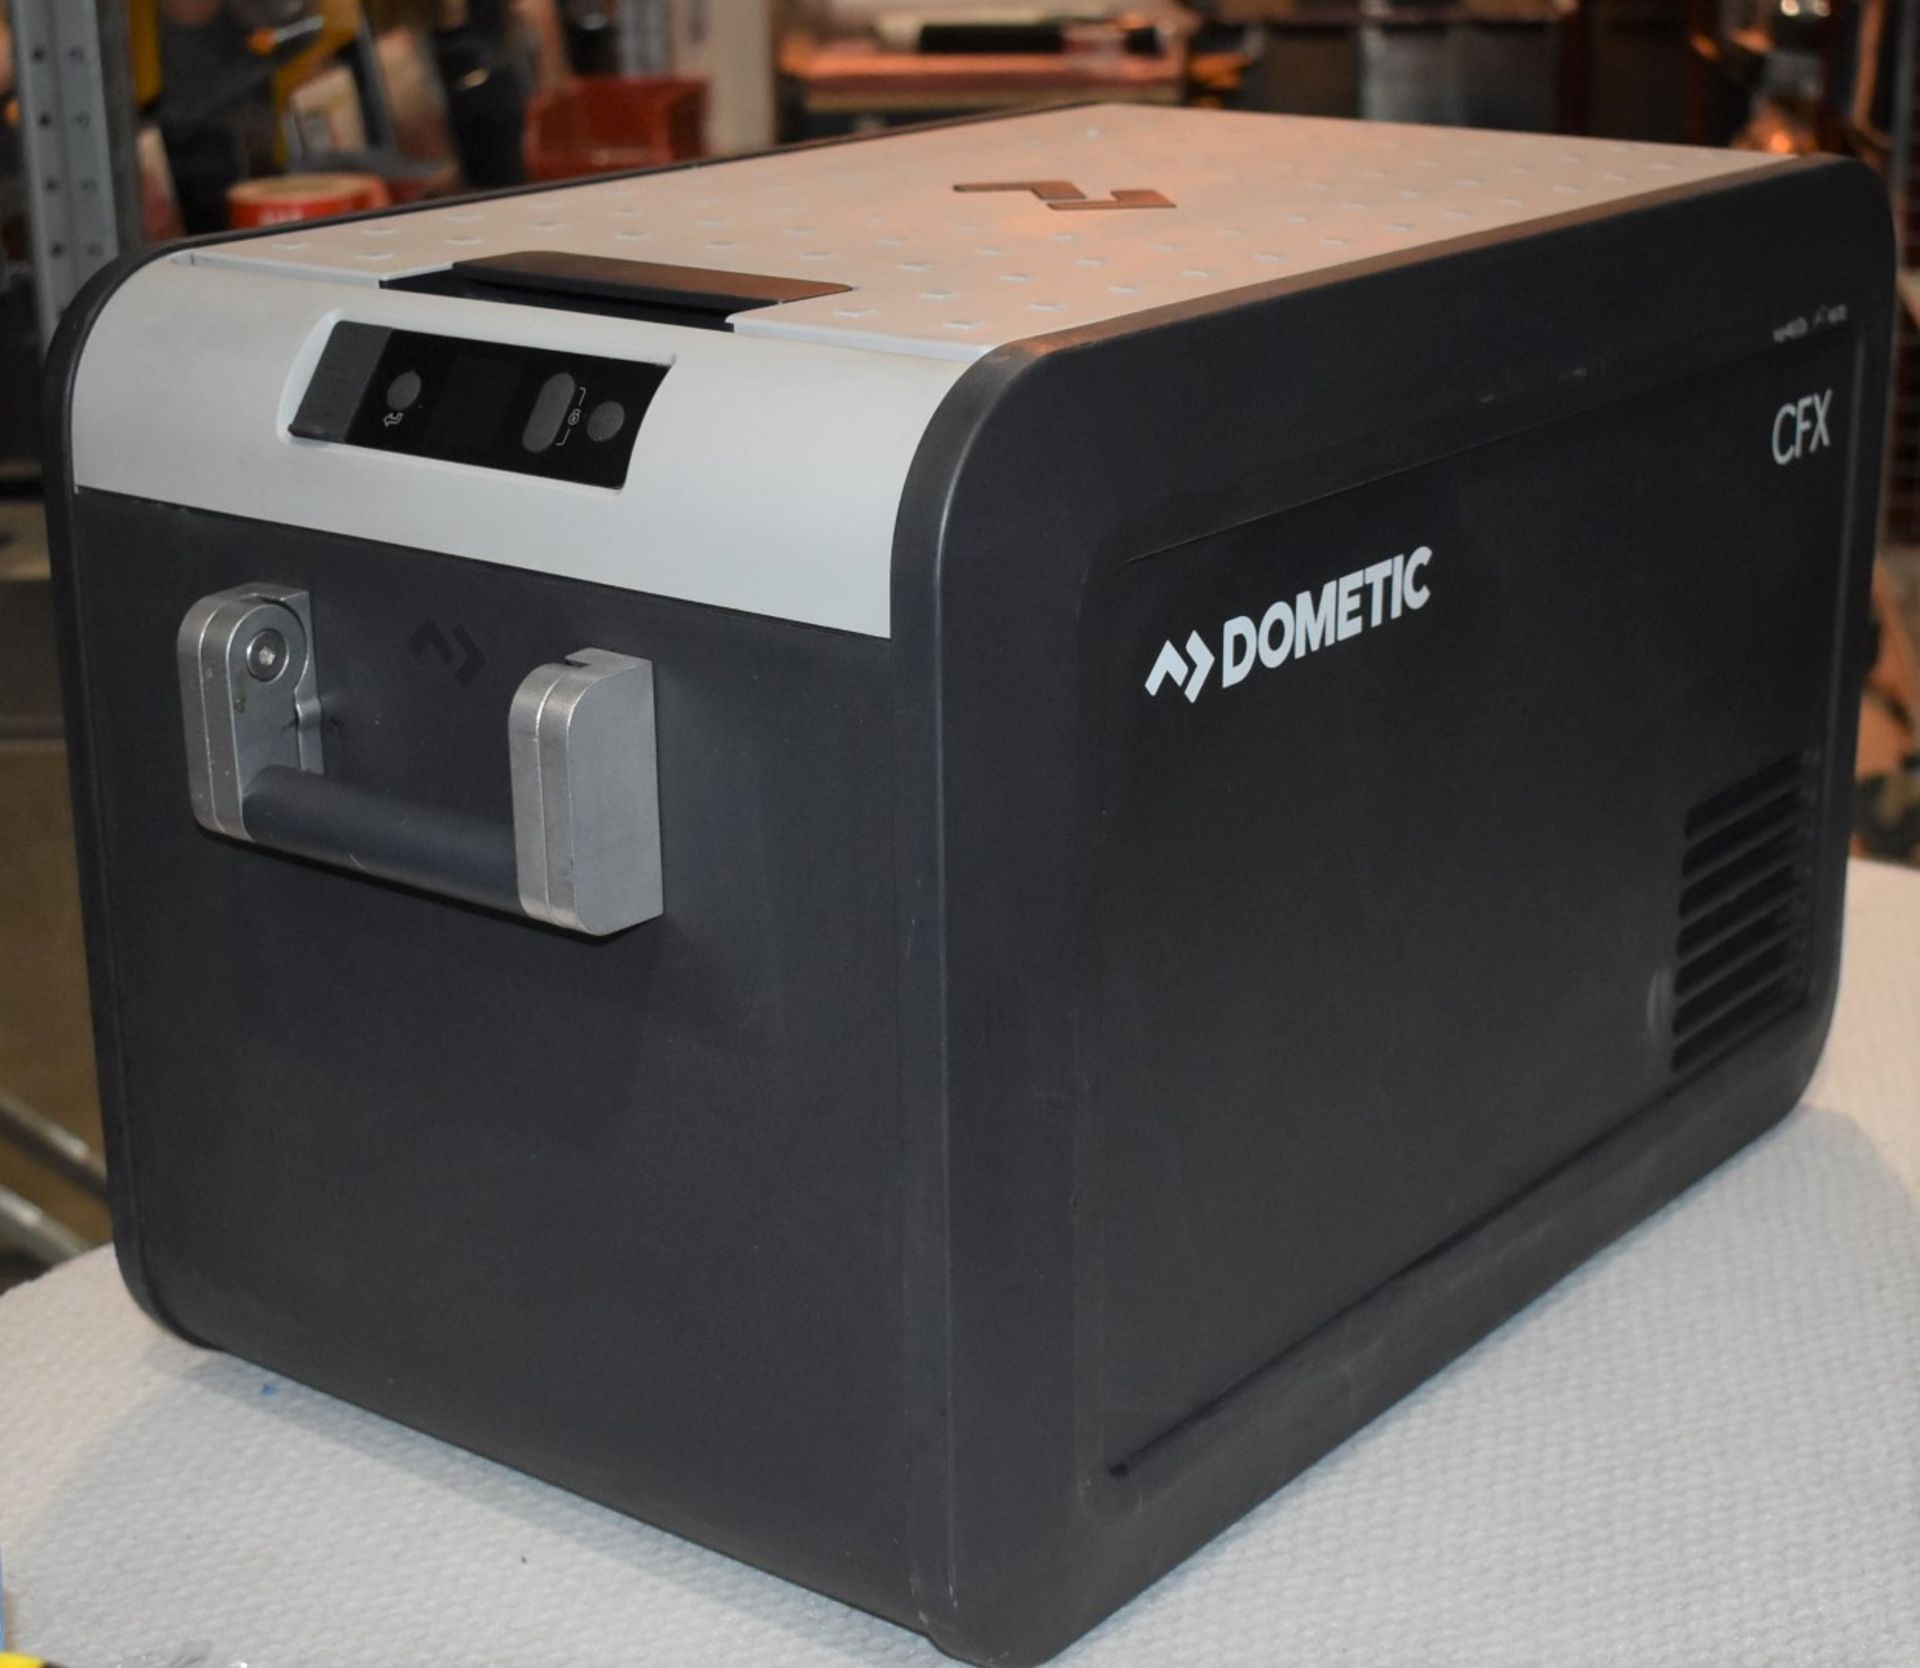 1 x Dometic CFX3 35 Portable Compressor Cooler / Freezer - For Camping, Motorhomes, Parties RRP £916 - Image 2 of 9